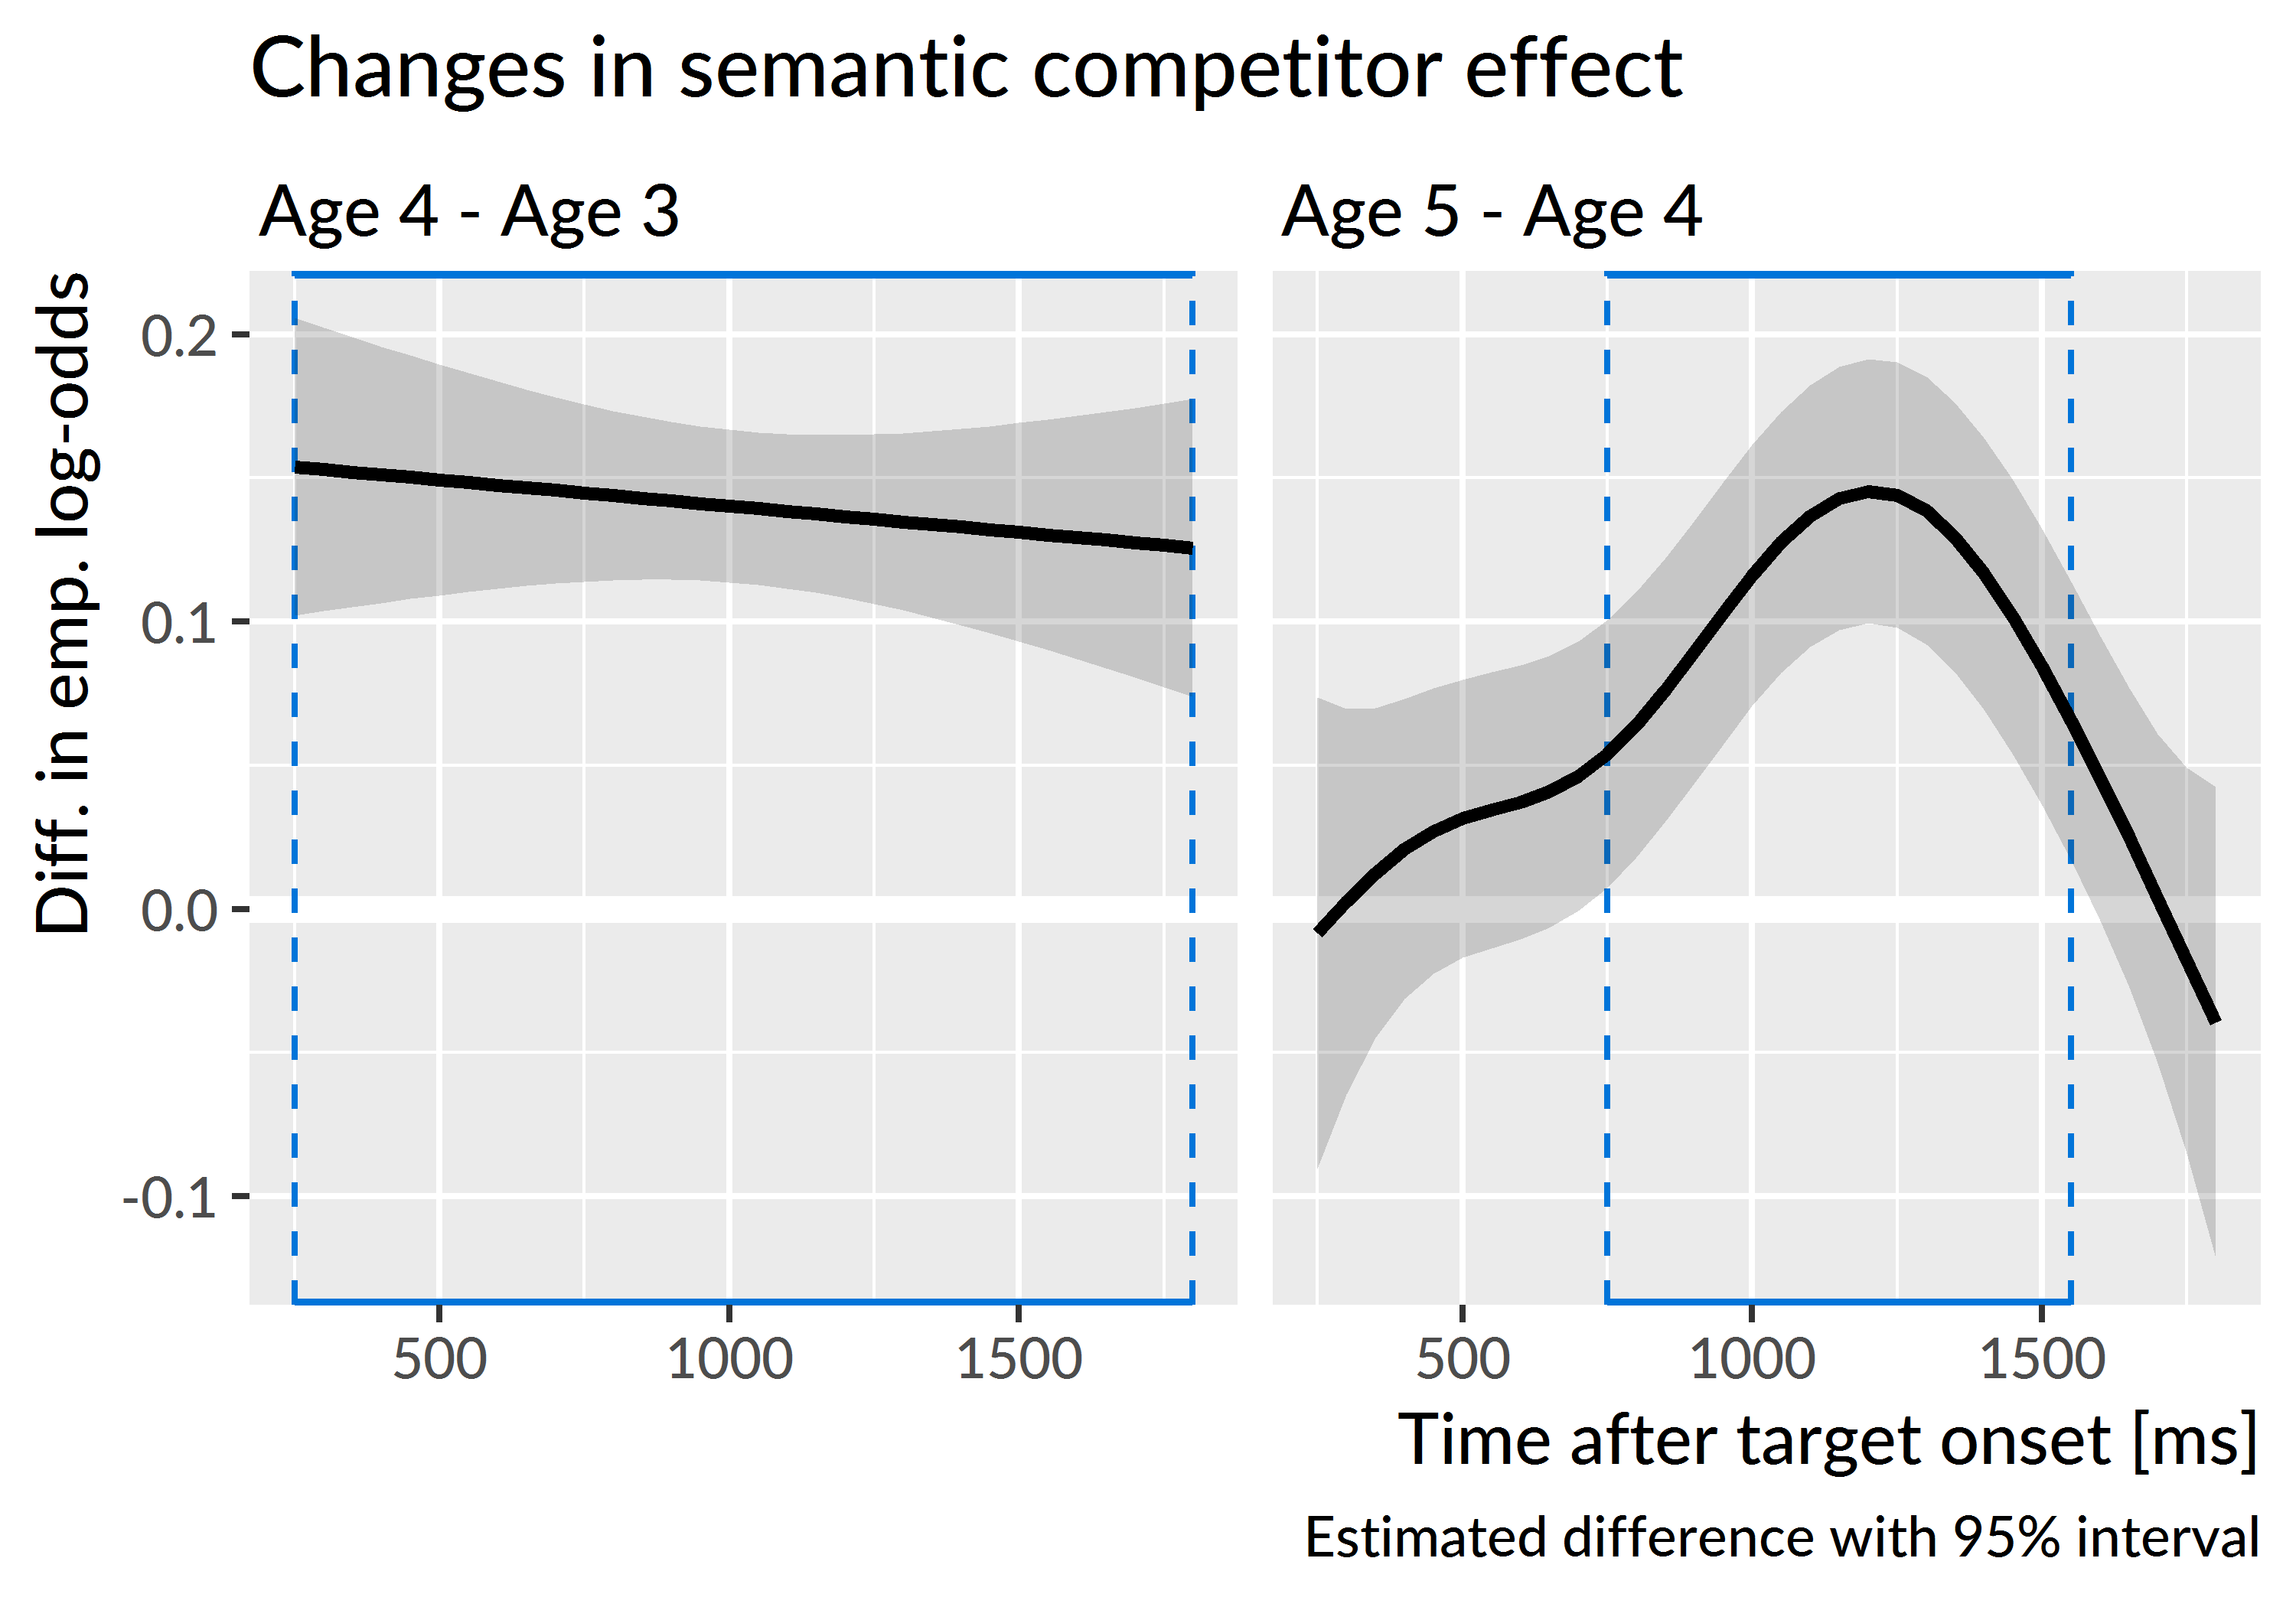 Differences in the average looks to the semantic competitor versus the unrelated word between age 4 and the other ages. Plotted line is estimated difference and the shaded region is the 95% confidence interval around that difference. Boxes highlight regions where the 95% interval excludes zero. The flat line on the left reflects how the shape of the growth curves remained the same from age 3 to age 4 and only differed in average height. From age 4 to age 5, the lines quickly diverge and the age-5 curve reaches a higher peak value.